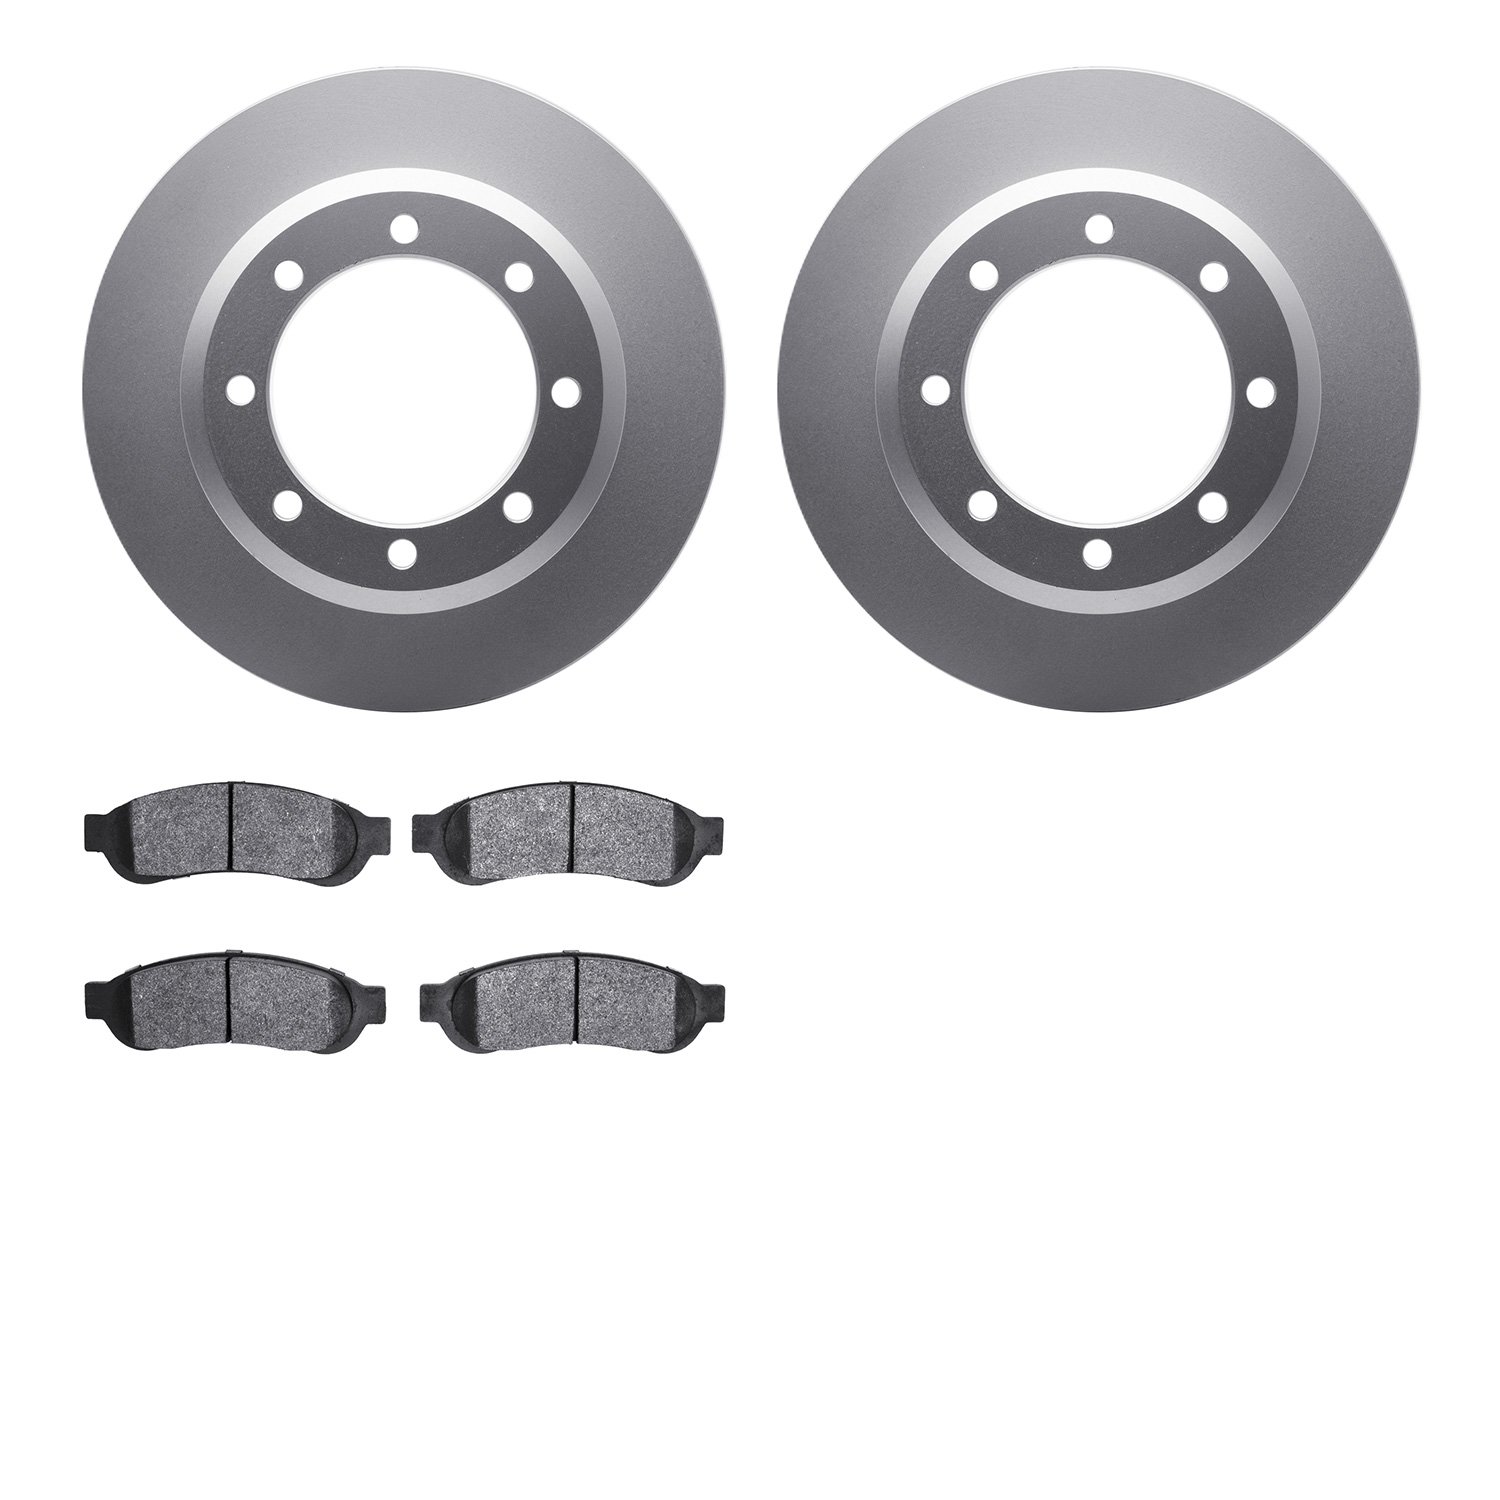 4402-54058 Geospec Brake Rotors with Ultimate-Duty Brake Pads Kit, 2005-2010 Ford/Lincoln/Mercury/Mazda, Position: Rear